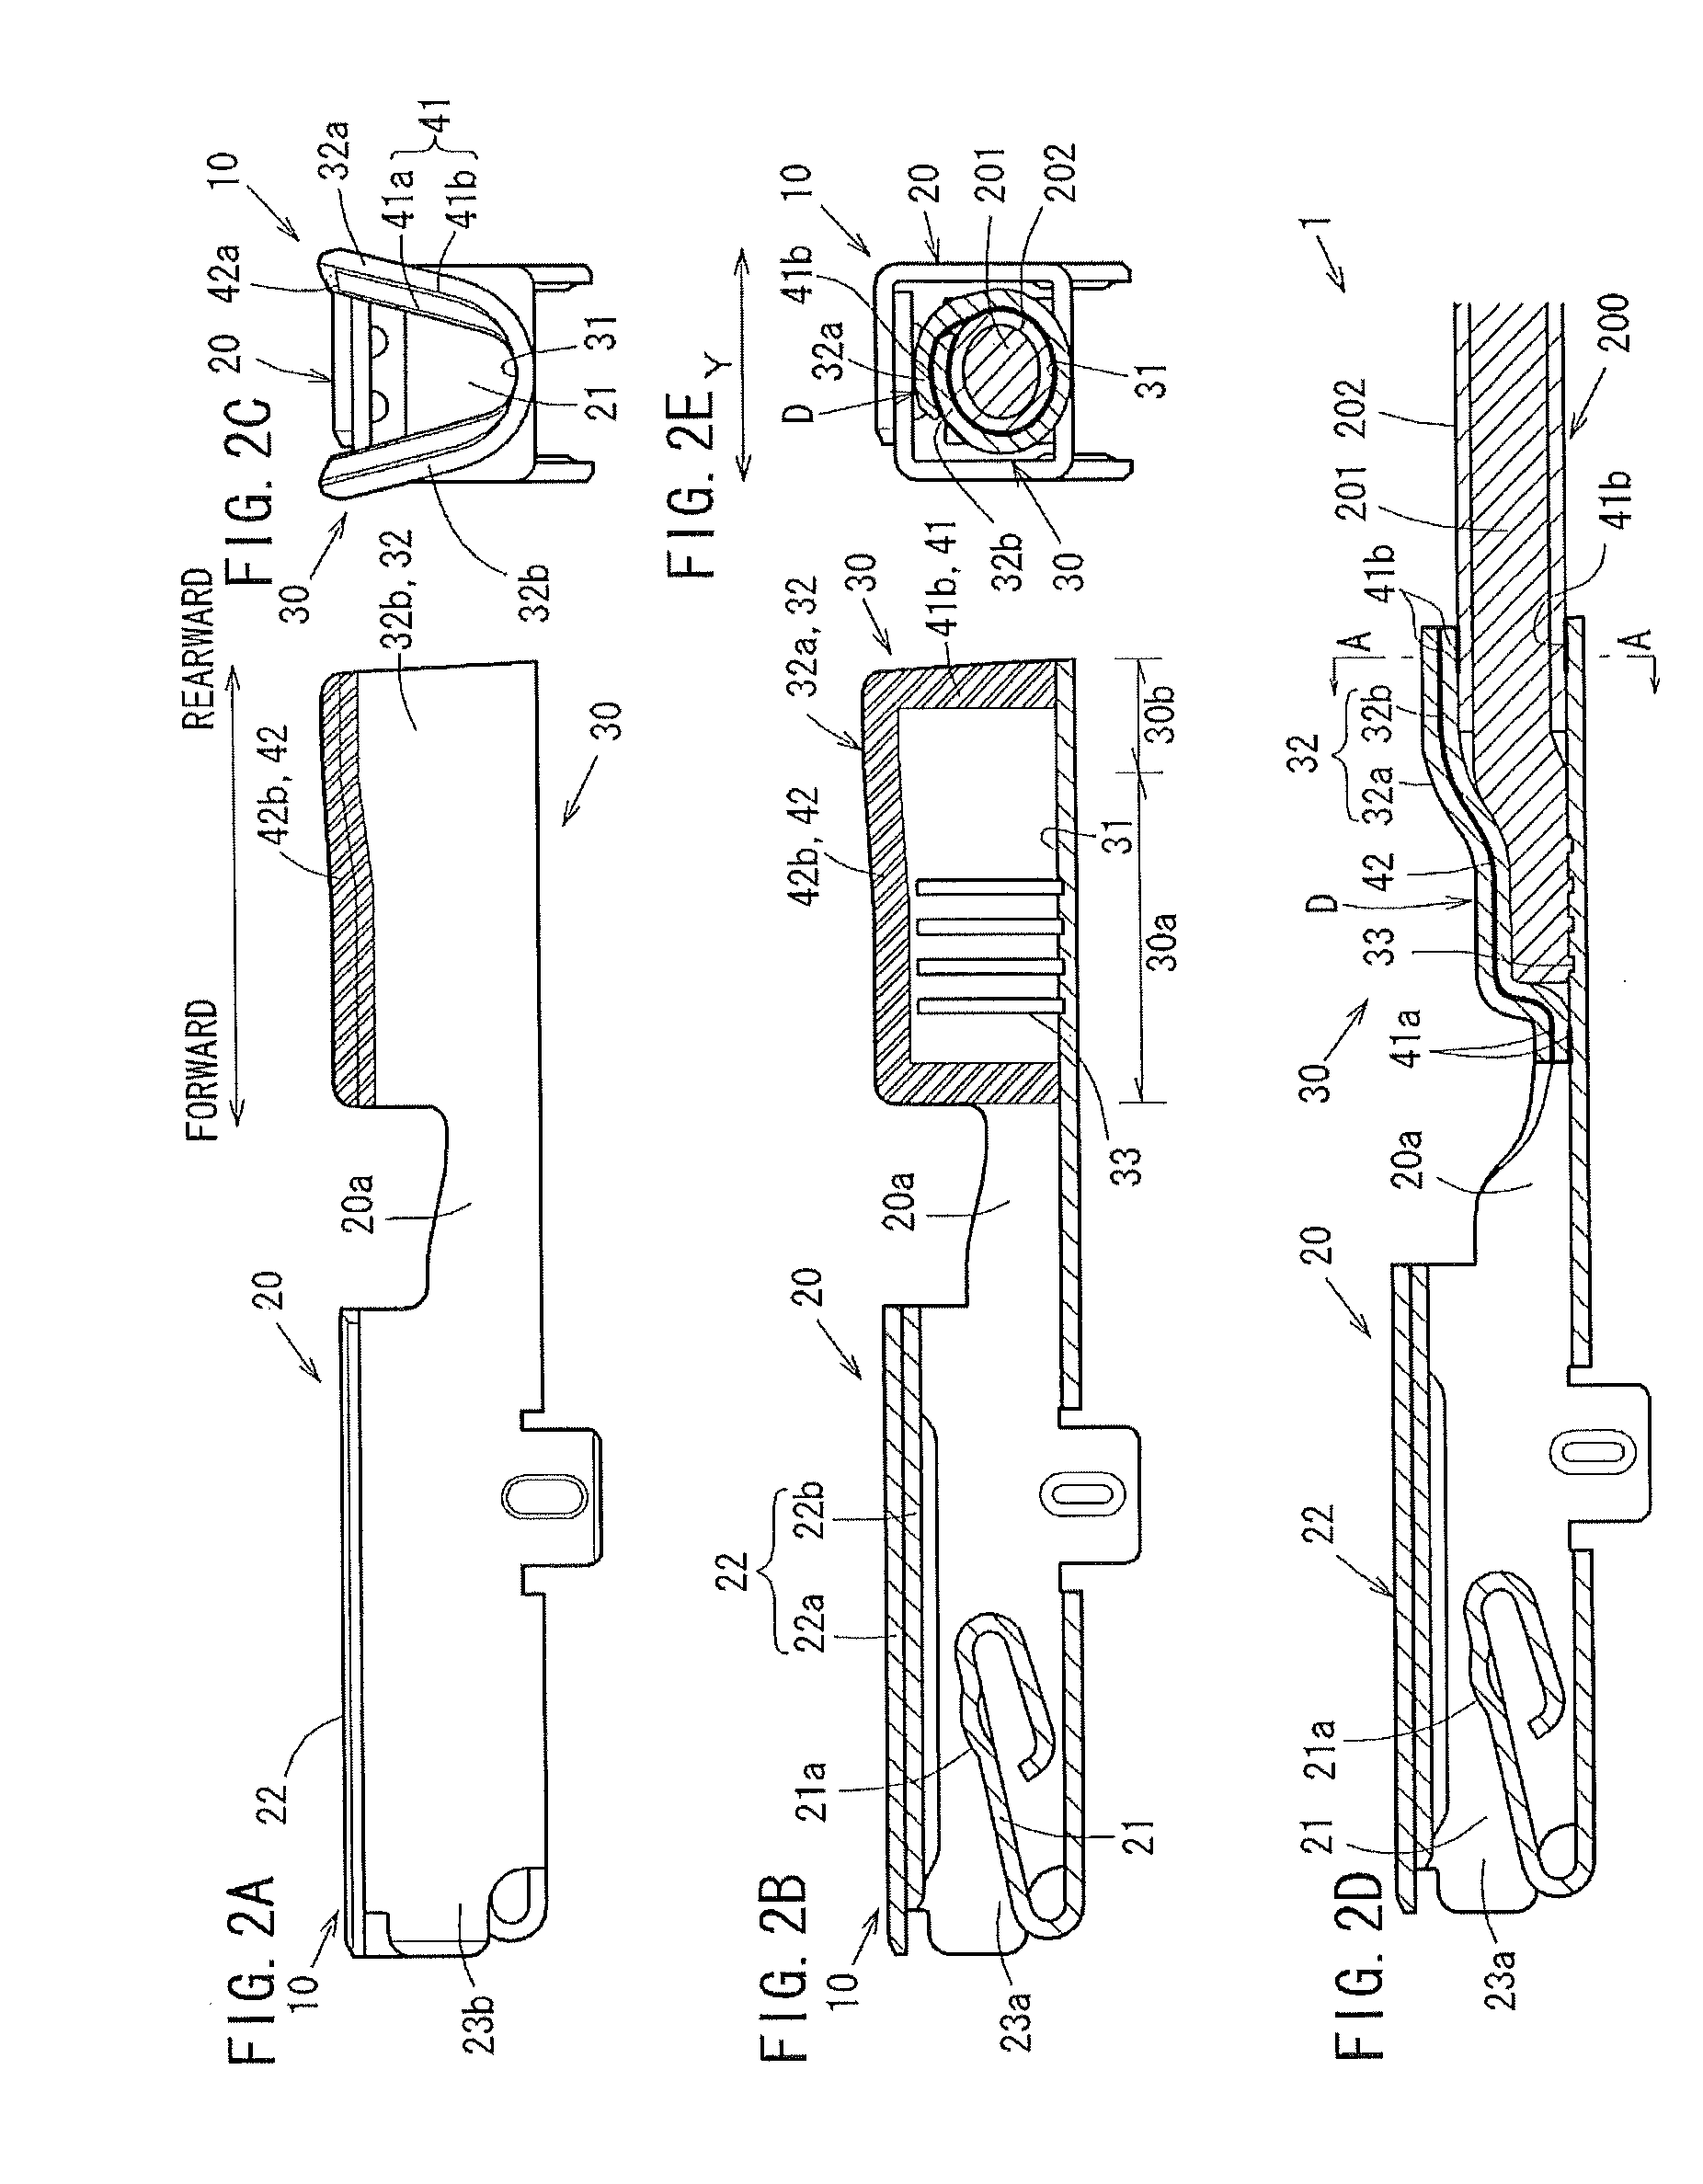 Crimp terminal, connection structural body and connector